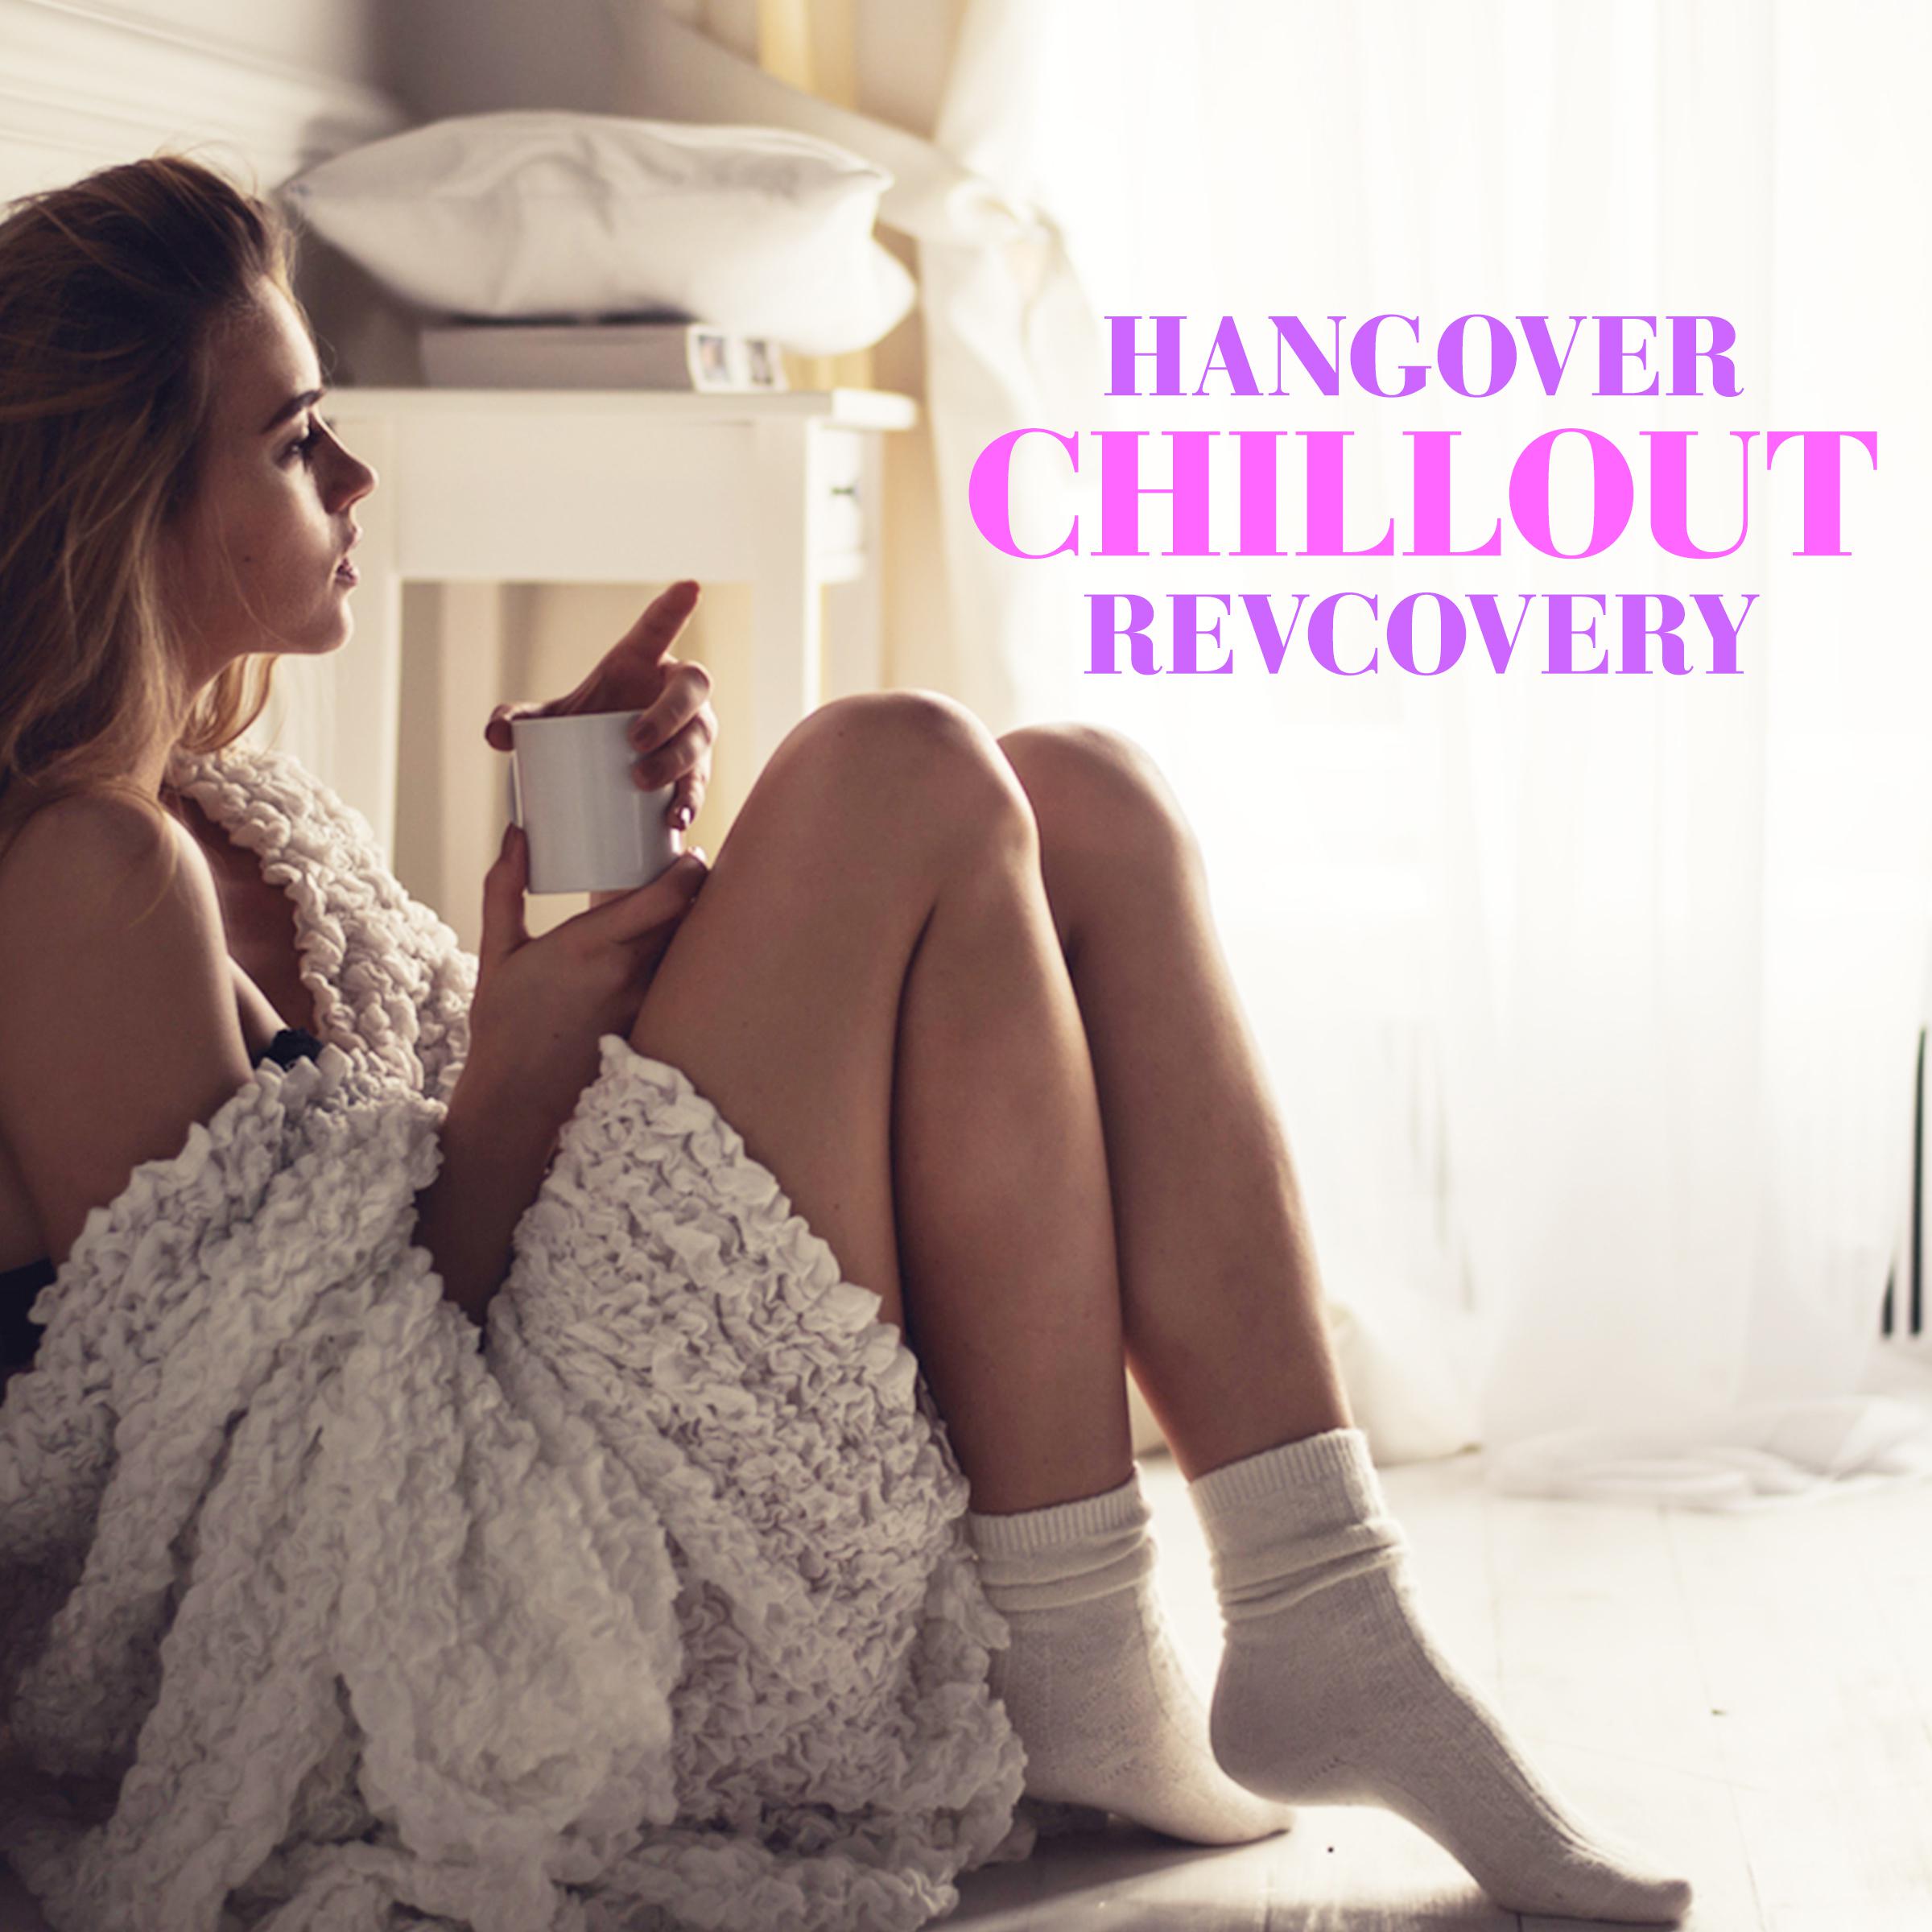 Hangover Chillout Revcovery